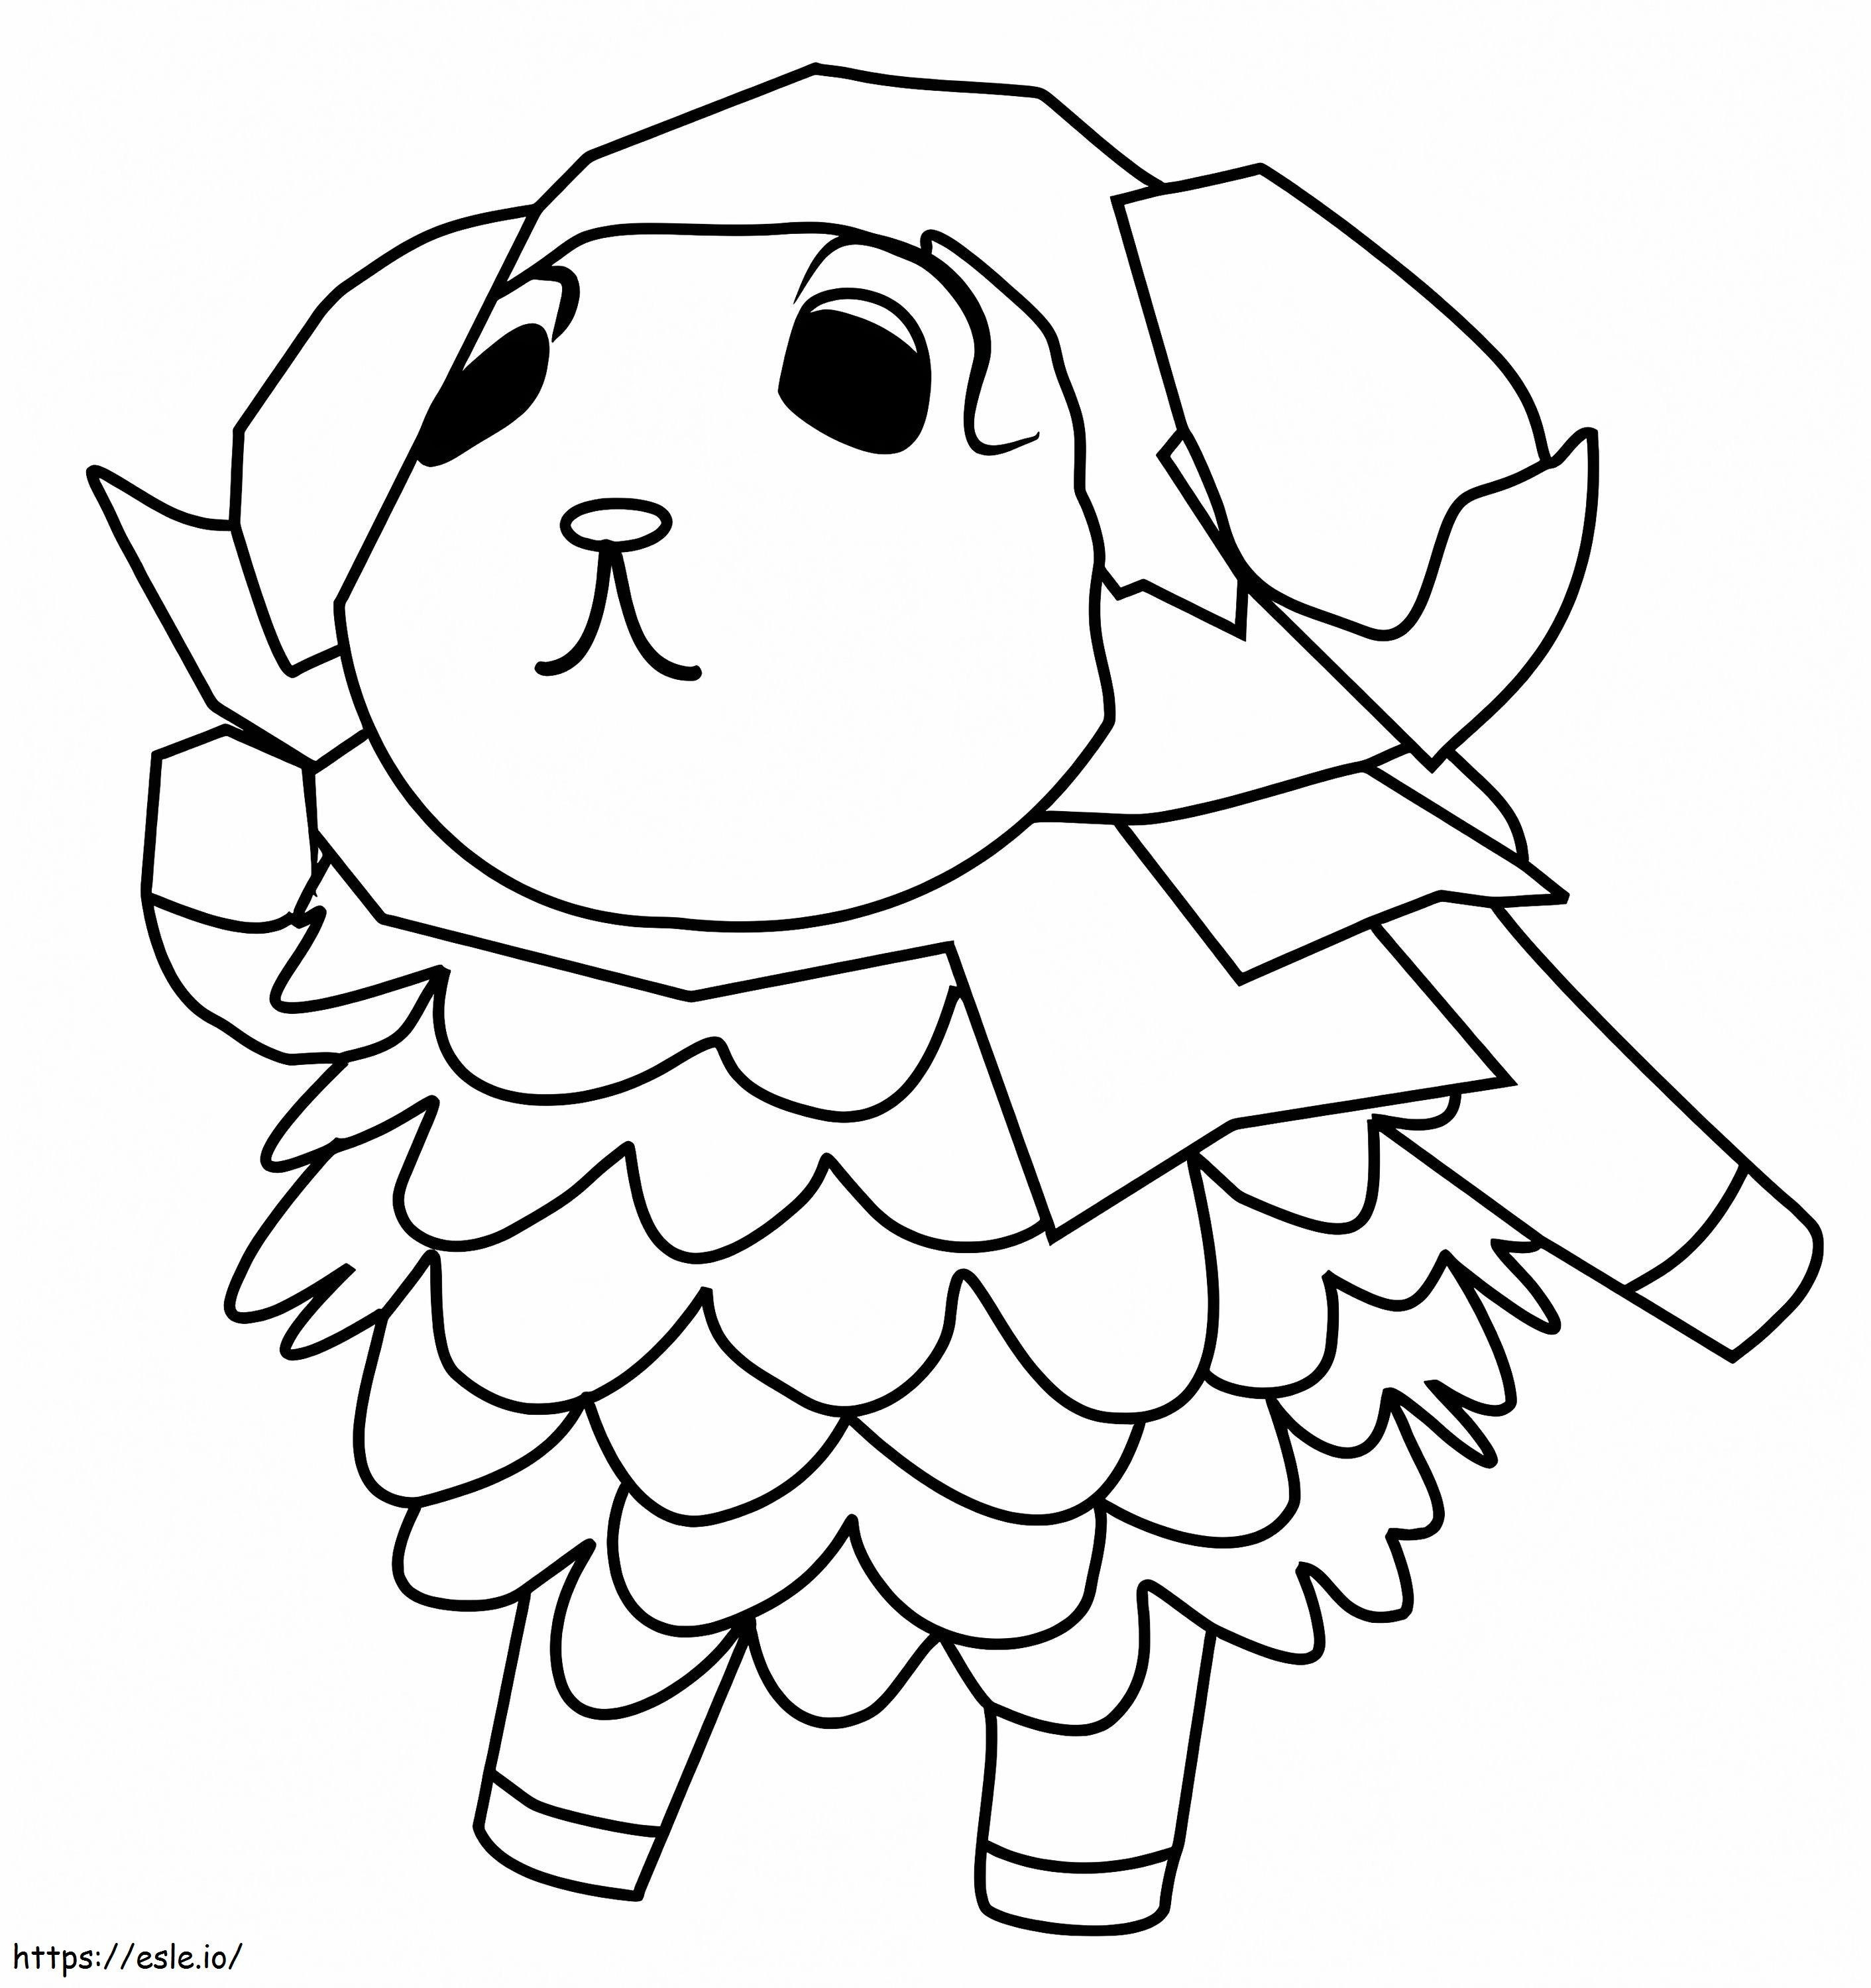 Willow From Animal Crossing coloring page